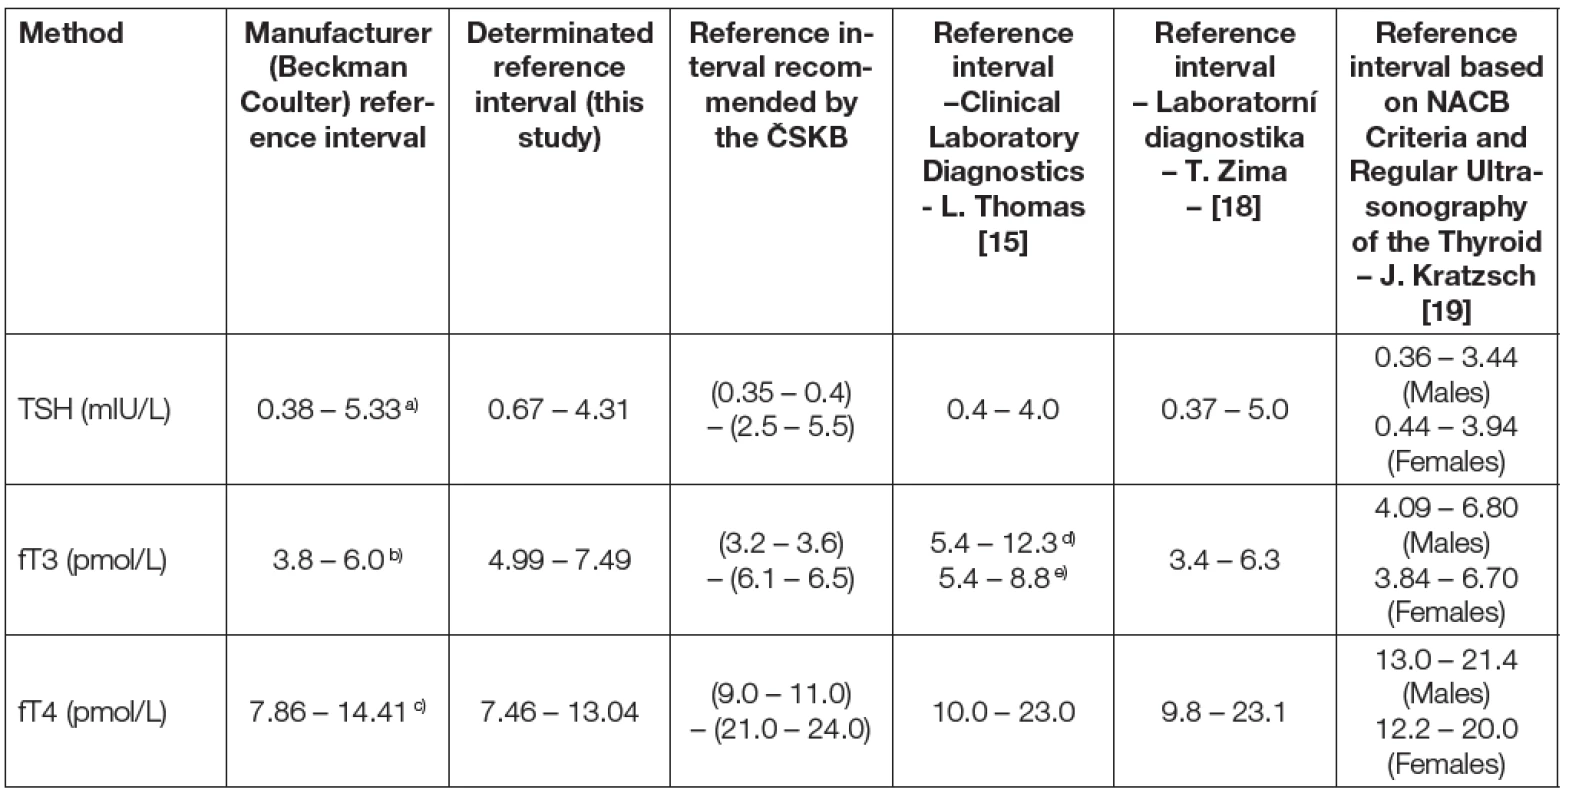 Comparison of manufacturer (Beckman Coulter) reference intervals, reference intervals determined in this study,
reference intervals recommended by the Czech Society for Clinical Biochemistry (ČSKB) and reference interval taken from
literature.